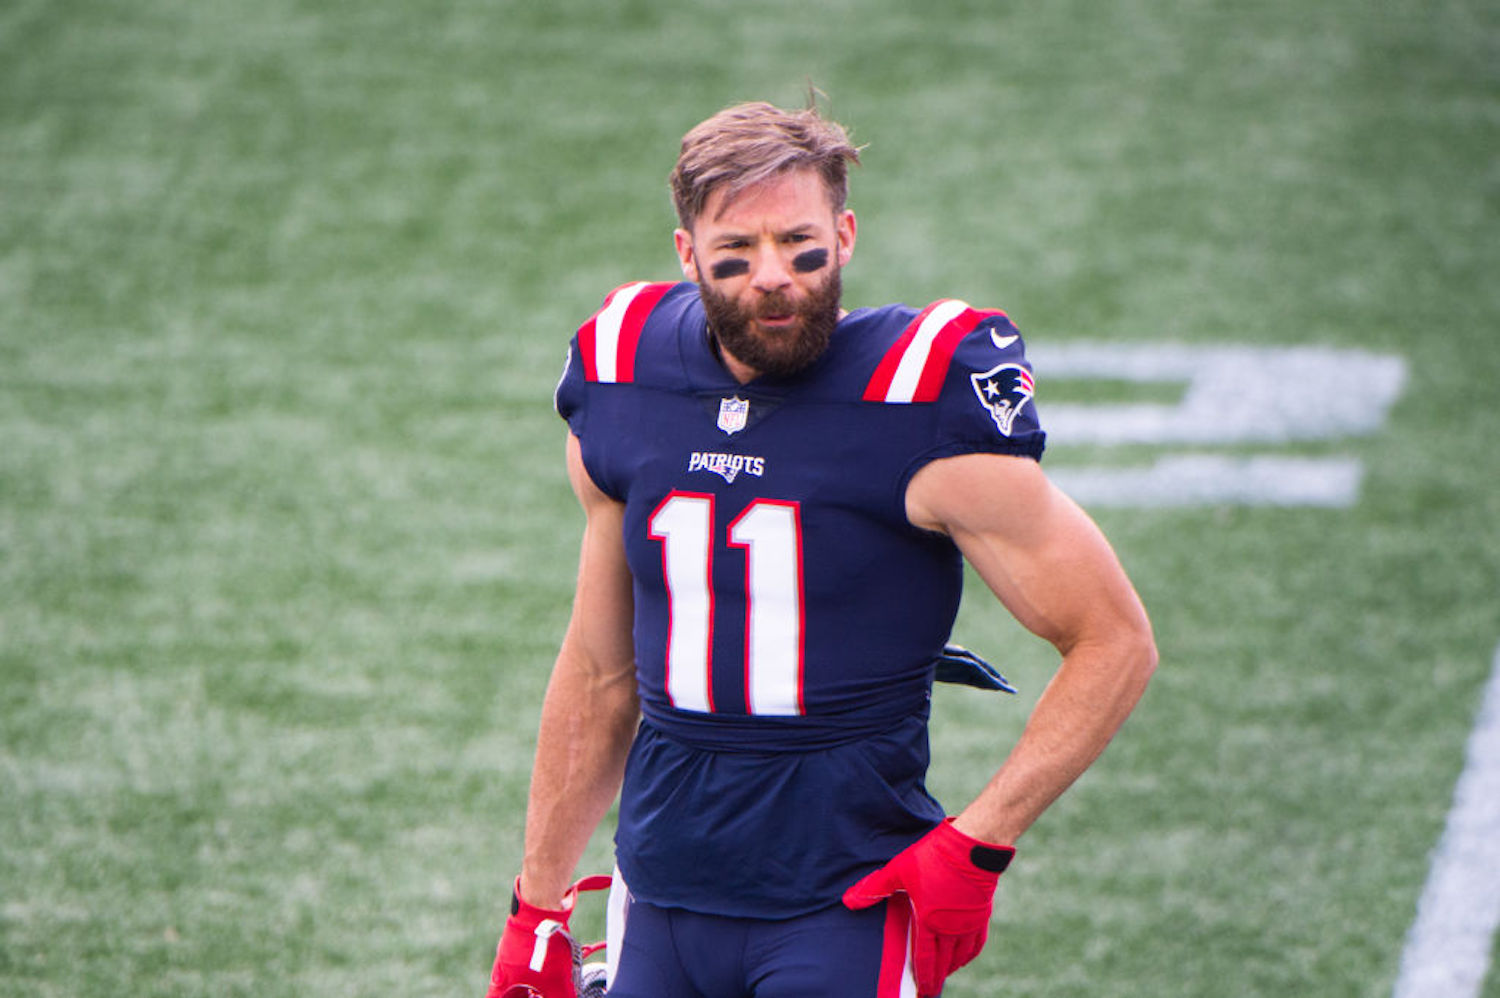 The New England Patriots aren't going in the right direction, and now they'll have to continue without star wide receiver Julian Edelman.